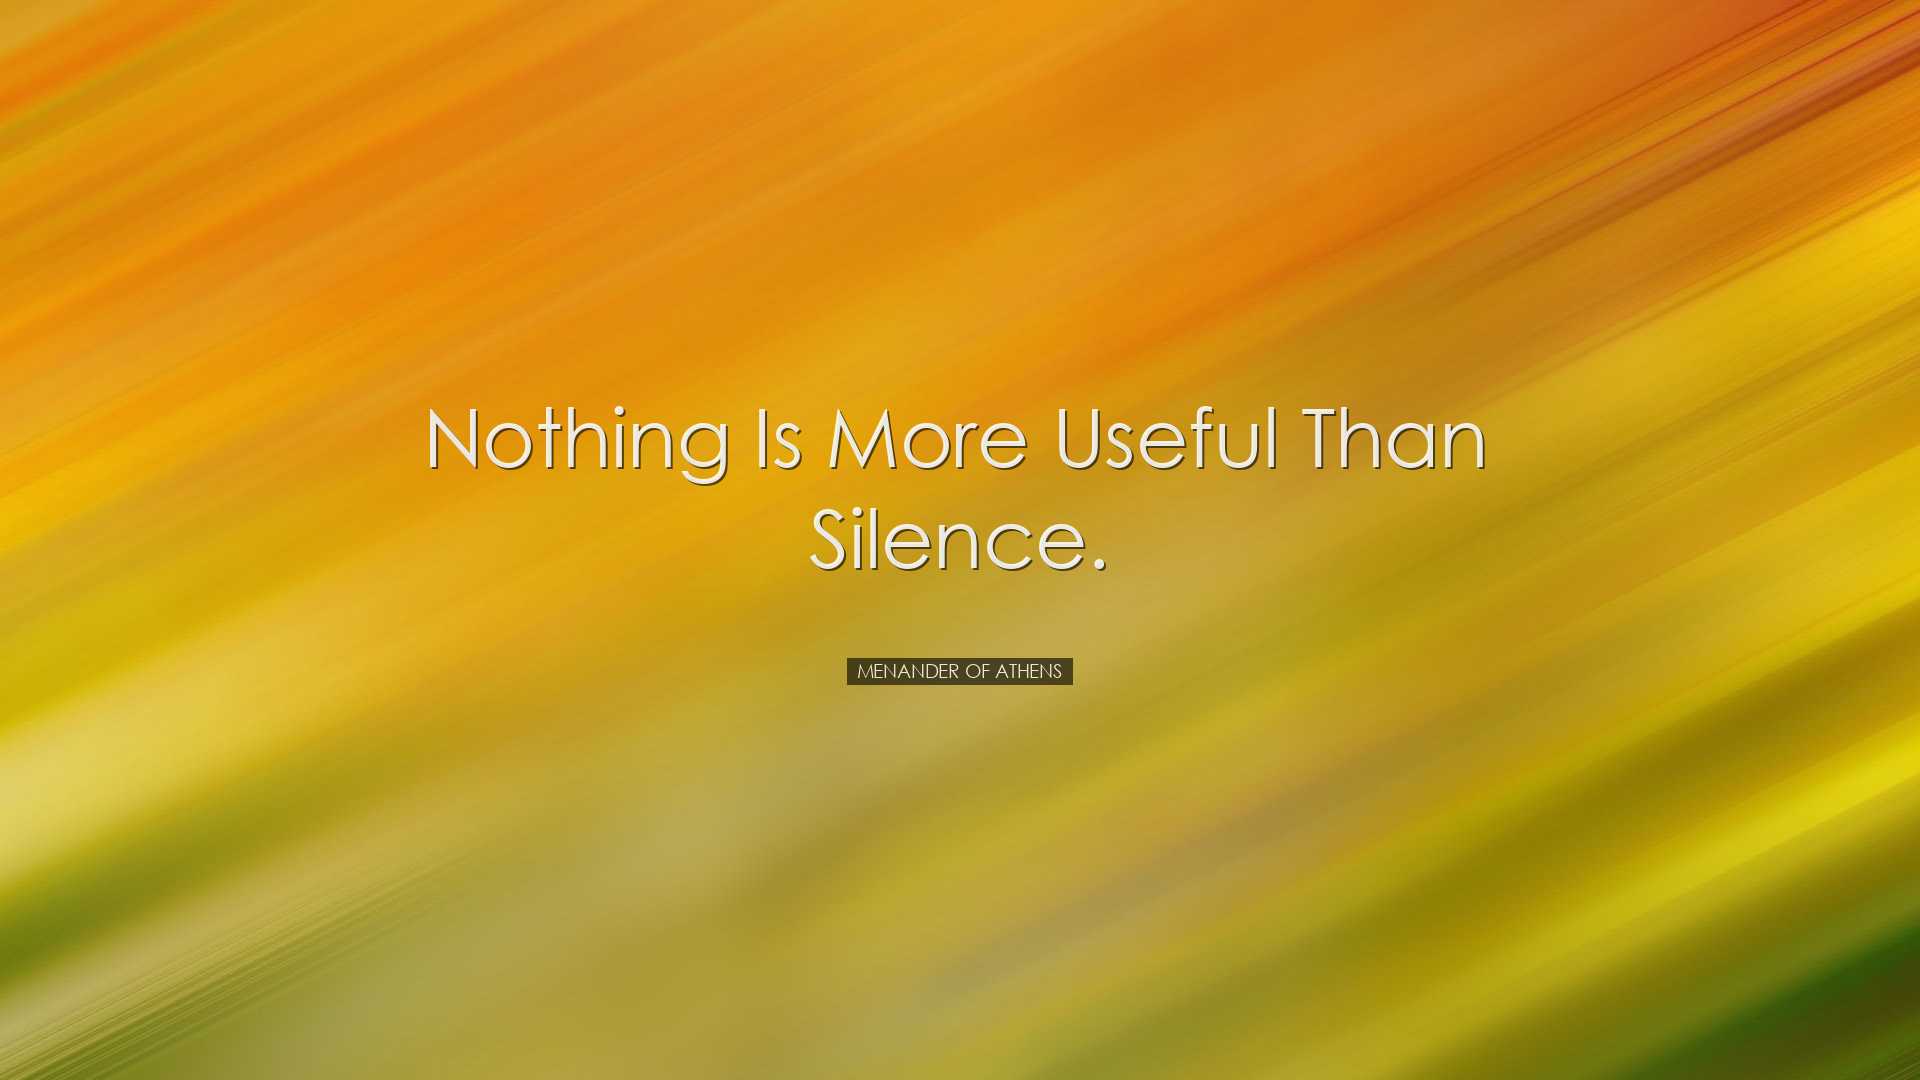 Nothing is more useful than silence. - Menander of Athens